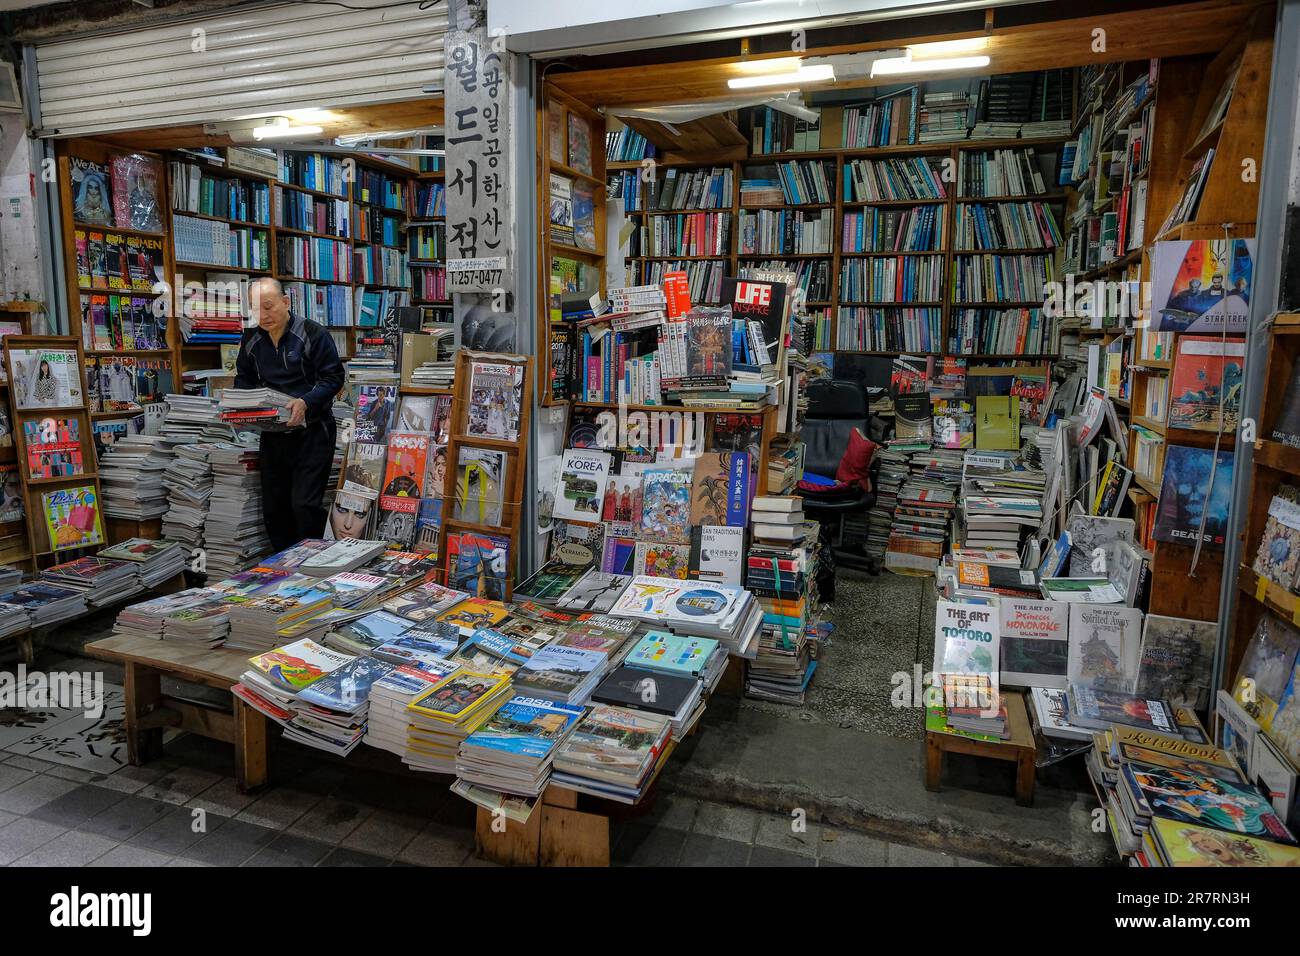 Busan, South Korea - May 26, 2023: A book seller on Bosu-dong Book Street, it is a famous book selling street in Busan, South Korea. Stock Photo